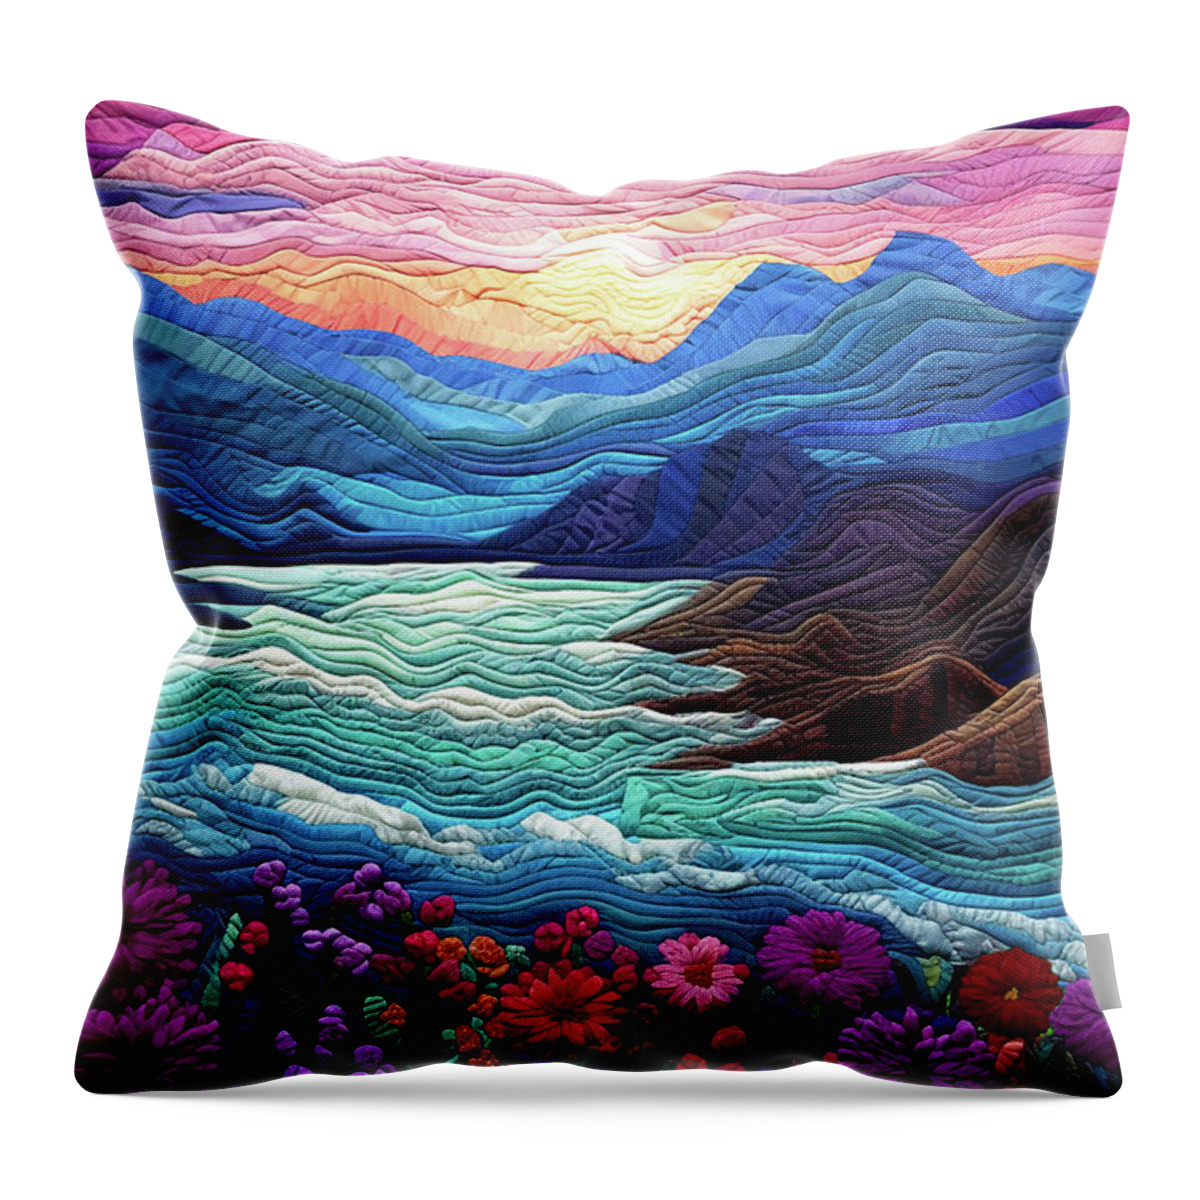 Landscapes Throw Pillow featuring the digital art Landscape at Sunset - Quilted Effect by Peggy Collins